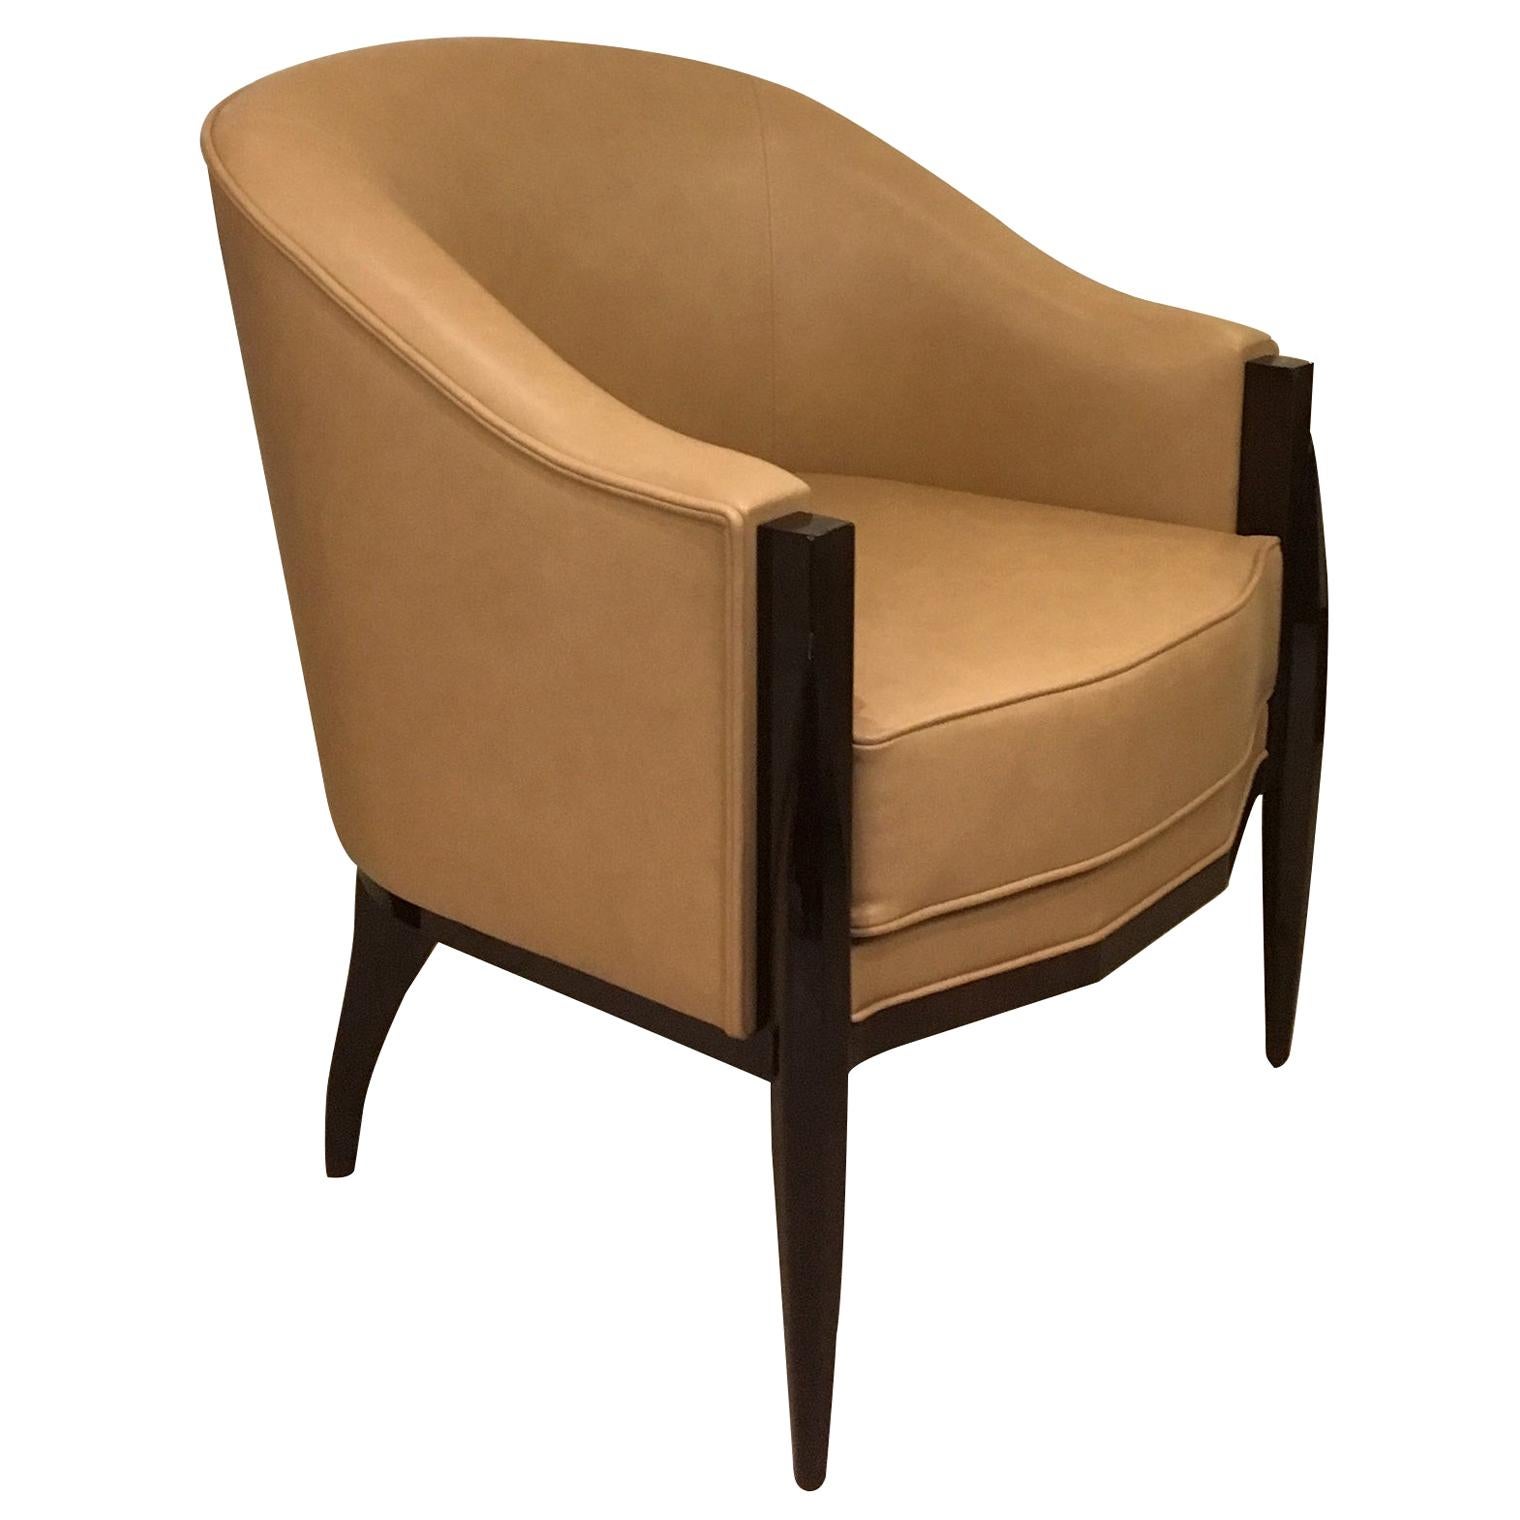 Cygal Art Deco Chair in Walnut after Ruhlmann Design, Handcrafted in Germany For Sale